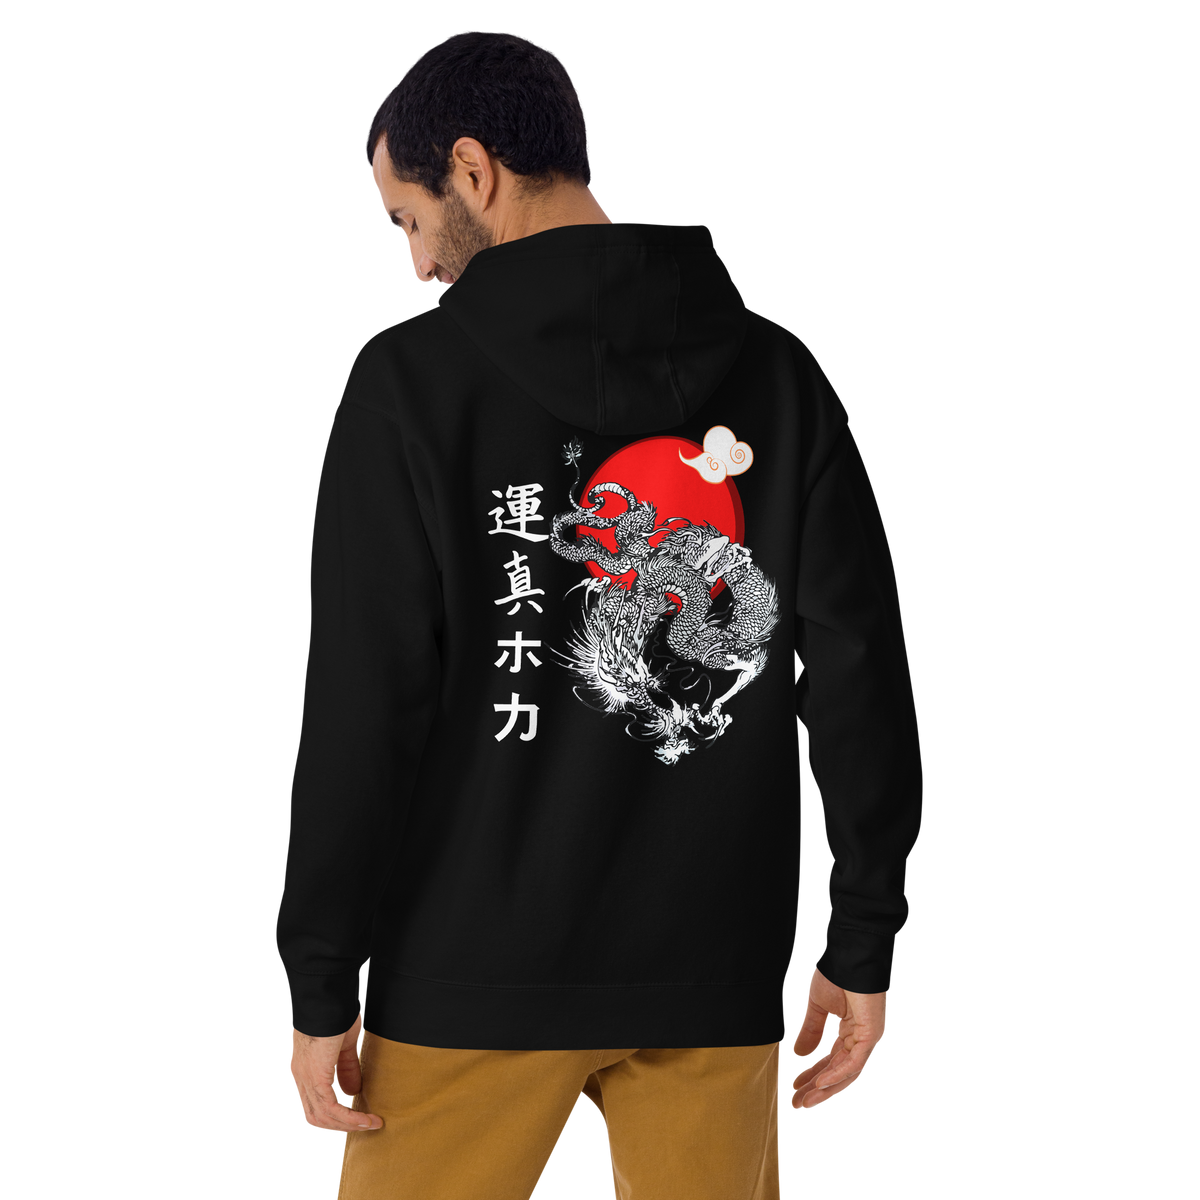 Japanese Dragon Hoodie, Cotton Hoodie, Japanese Dragon, Tokio Japan, Hoodie, Japanese Graphic Tee, Japanese Culture apparel, Japanese Hoodie, kawaii, Samurai Shirt, Japanese Art, Japanese Art Hoodie, Gift for dad, Gift for him  